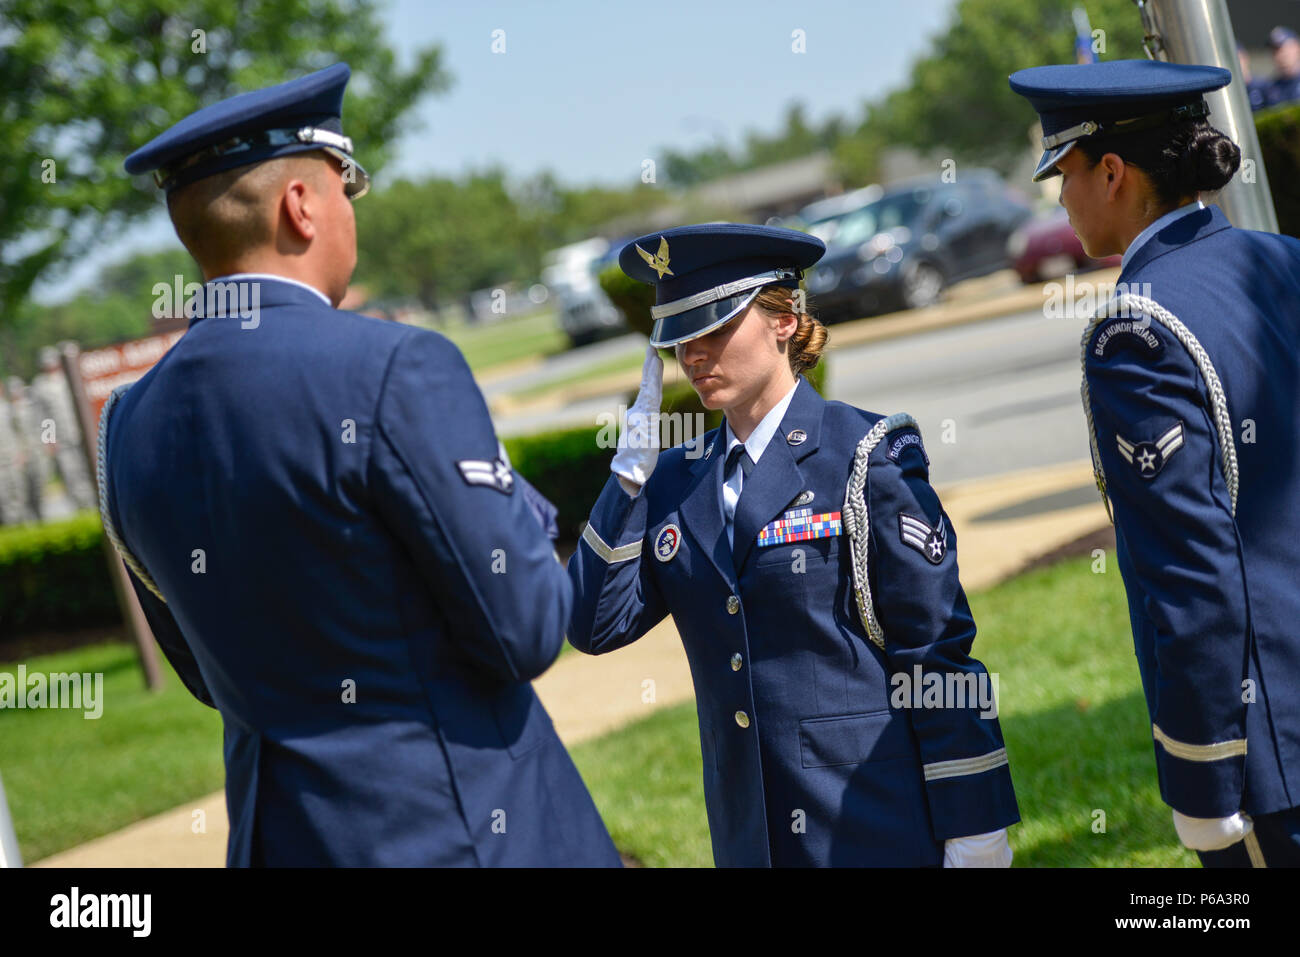 Senior Airman Tiffany Fogel, 99th Airlift Squadron administrative assistant and resource advisor, salutes after handing off an American flag during a Memorial Day retreat ceremony at the 89th Airlift Wing headquarters building at Joint Base Andrews, Md., May 26, 2016. In addition to her duties within the 99th AS, Fogel is serving on the JBA Honor Guard, and performs ceremonies such as this one; and is learning expertise in key areas such as manuals, uniforms, history and traditions and a variety of ceremonies. (U.S. Air Force photo by Senior Master Sgt. Kevin Wallace/RELEASED) Stock Photo